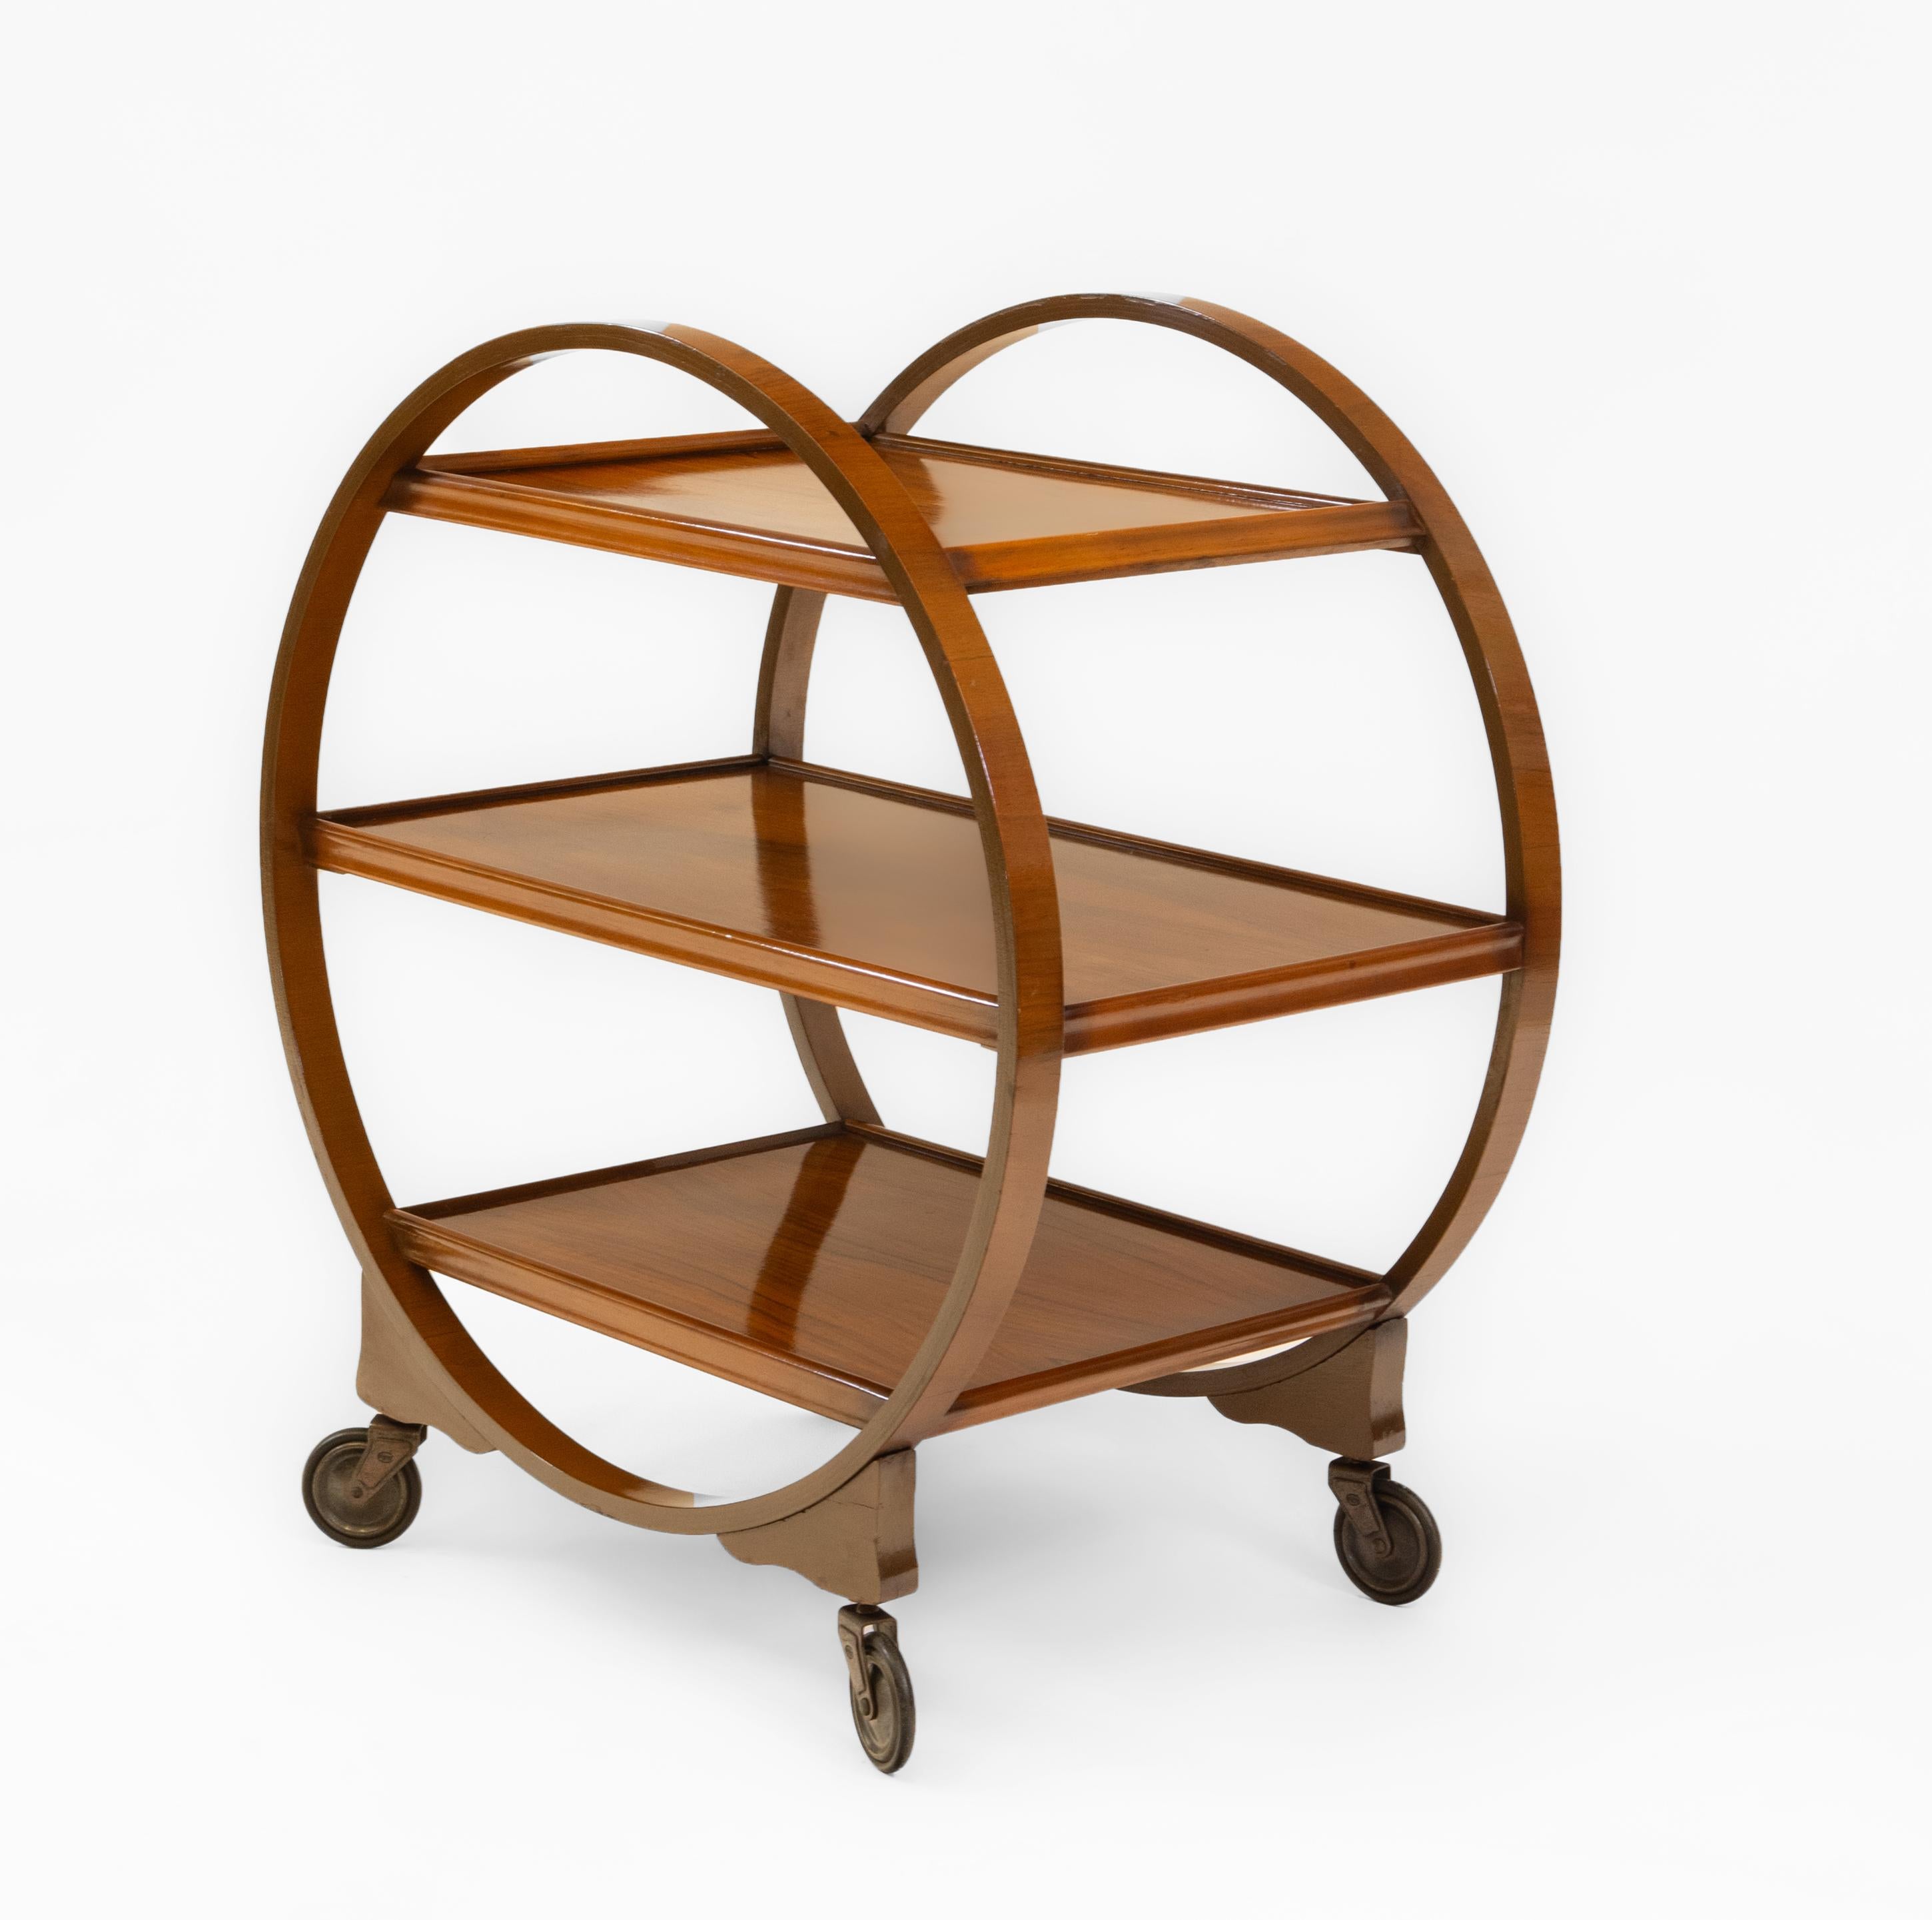 1930s English Art Deco Walnut Round Drinks Cocktail Trolley Modernist Bar Cart For Sale 3